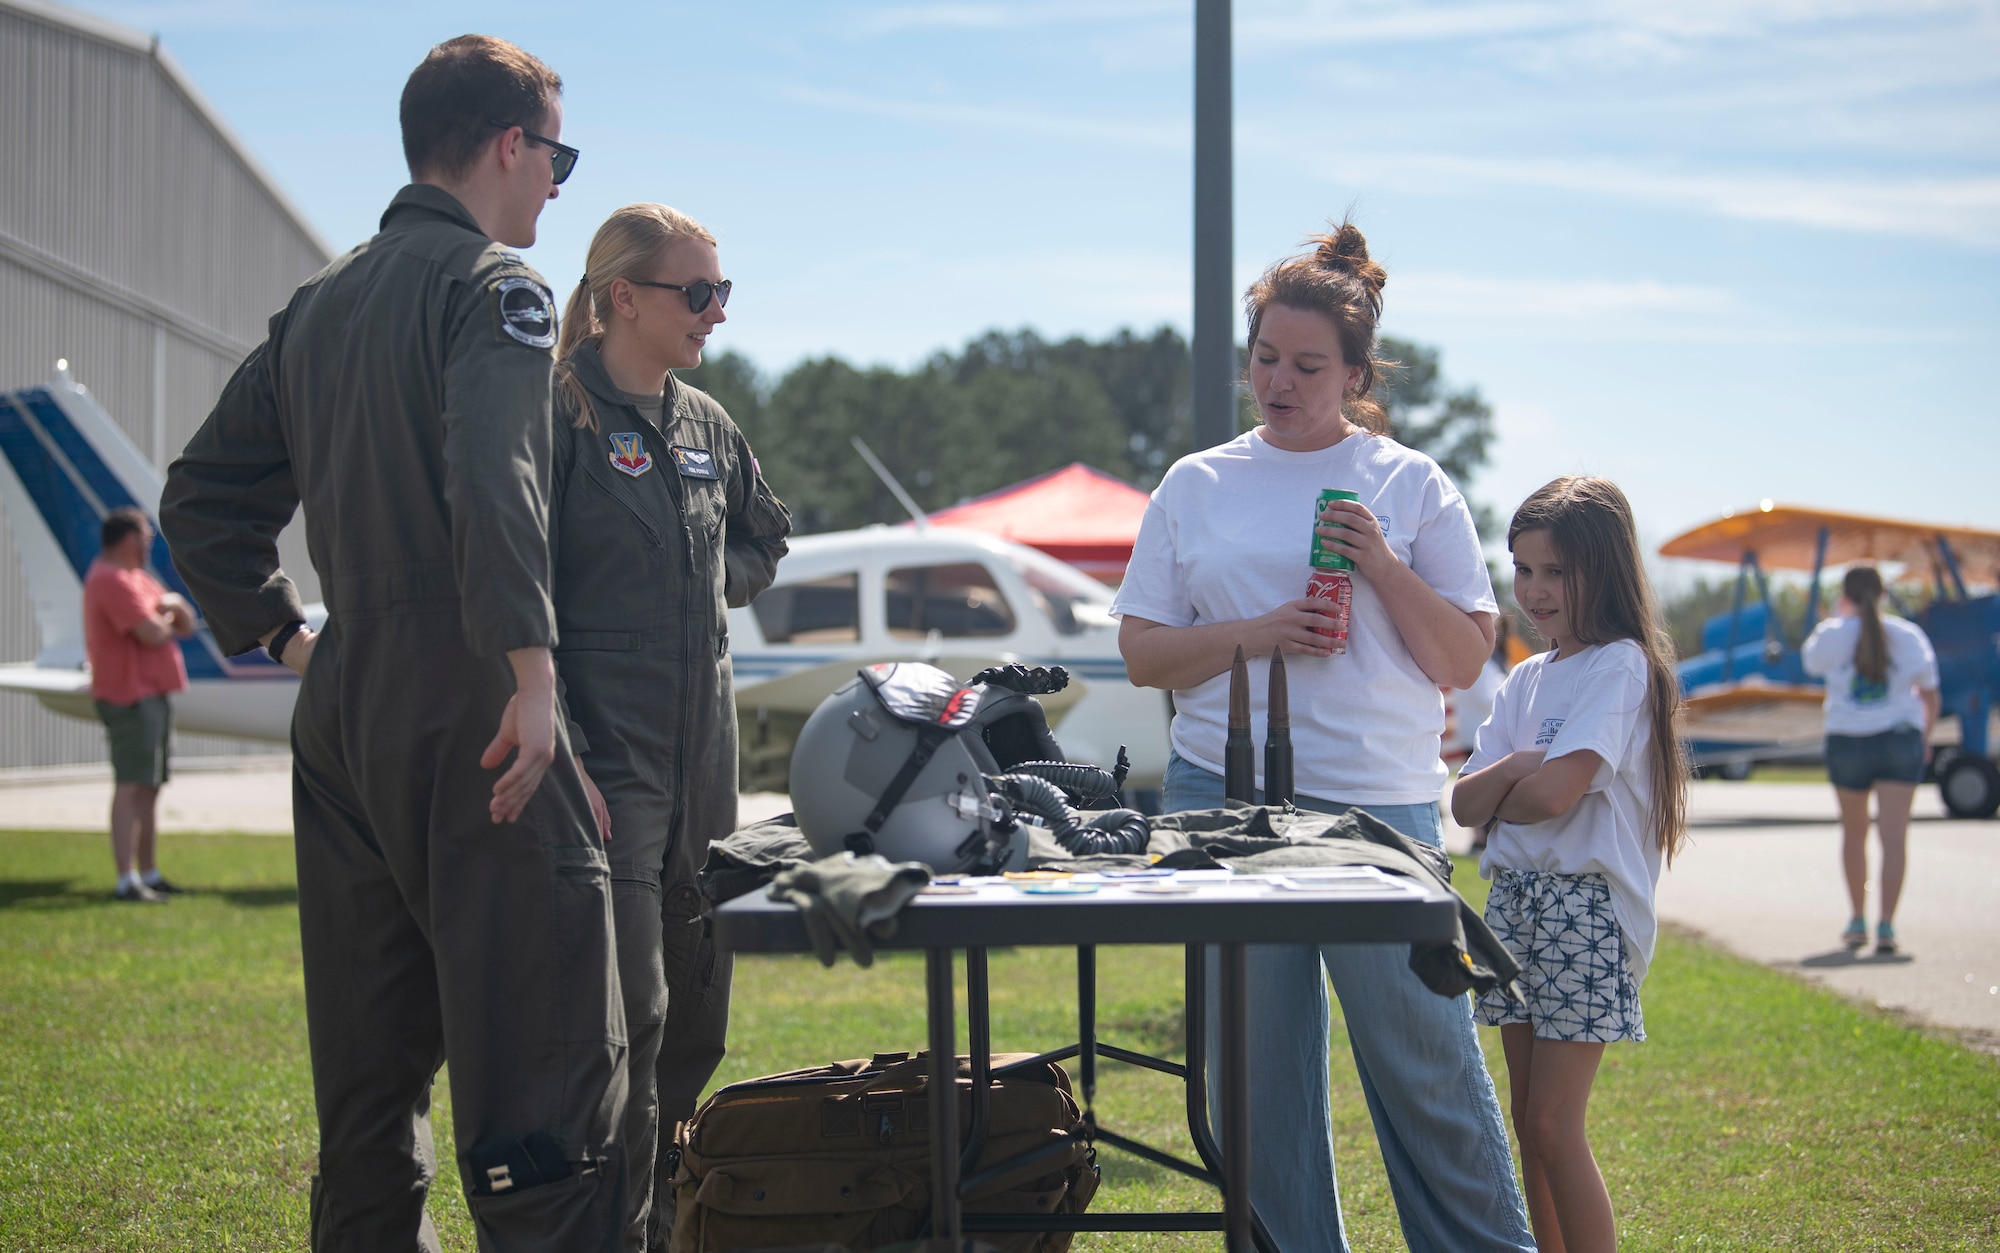 U.S. Air Force Capt. Rose Porras, 71st Rescue Squadron HC-130J Combat King II pilot, and Capt. Nicholas Porras, 75th Fighter Squadron A-10 Thunderbolt II pilot, show flight equipment to a mother and daughter during the Youth Flight Experience event at Fitzgerald, Georgia, March 4, 2023. This was the second year members of Moody Air Force Base participated in the event. (U.S. Air Force photo by Staff Sgt. Thomas Johns)